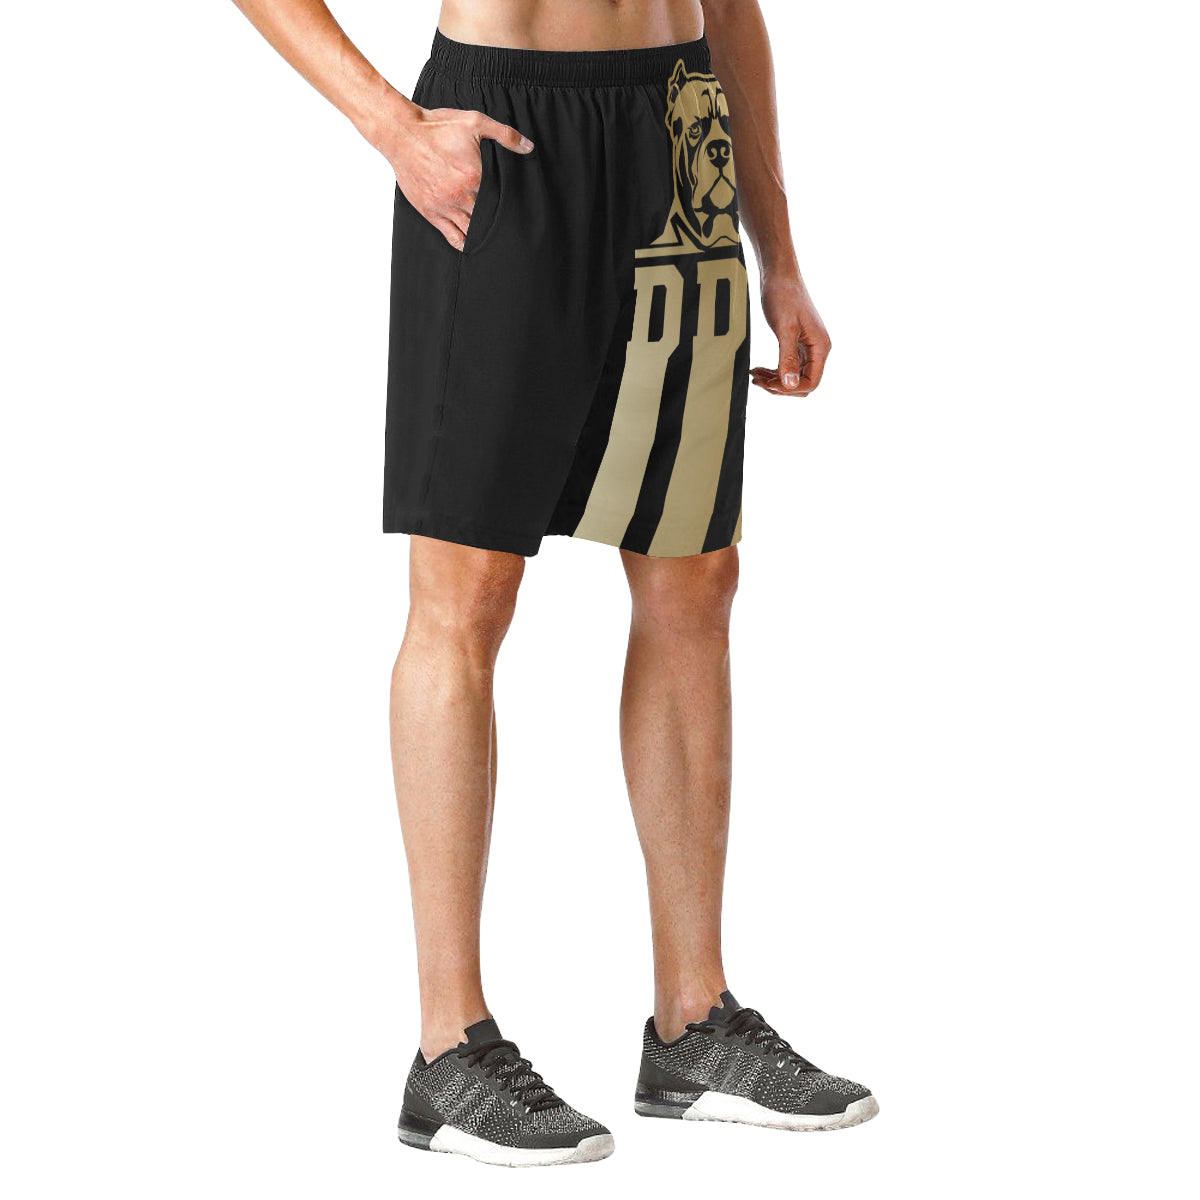 Black and Gold Beach Shorts